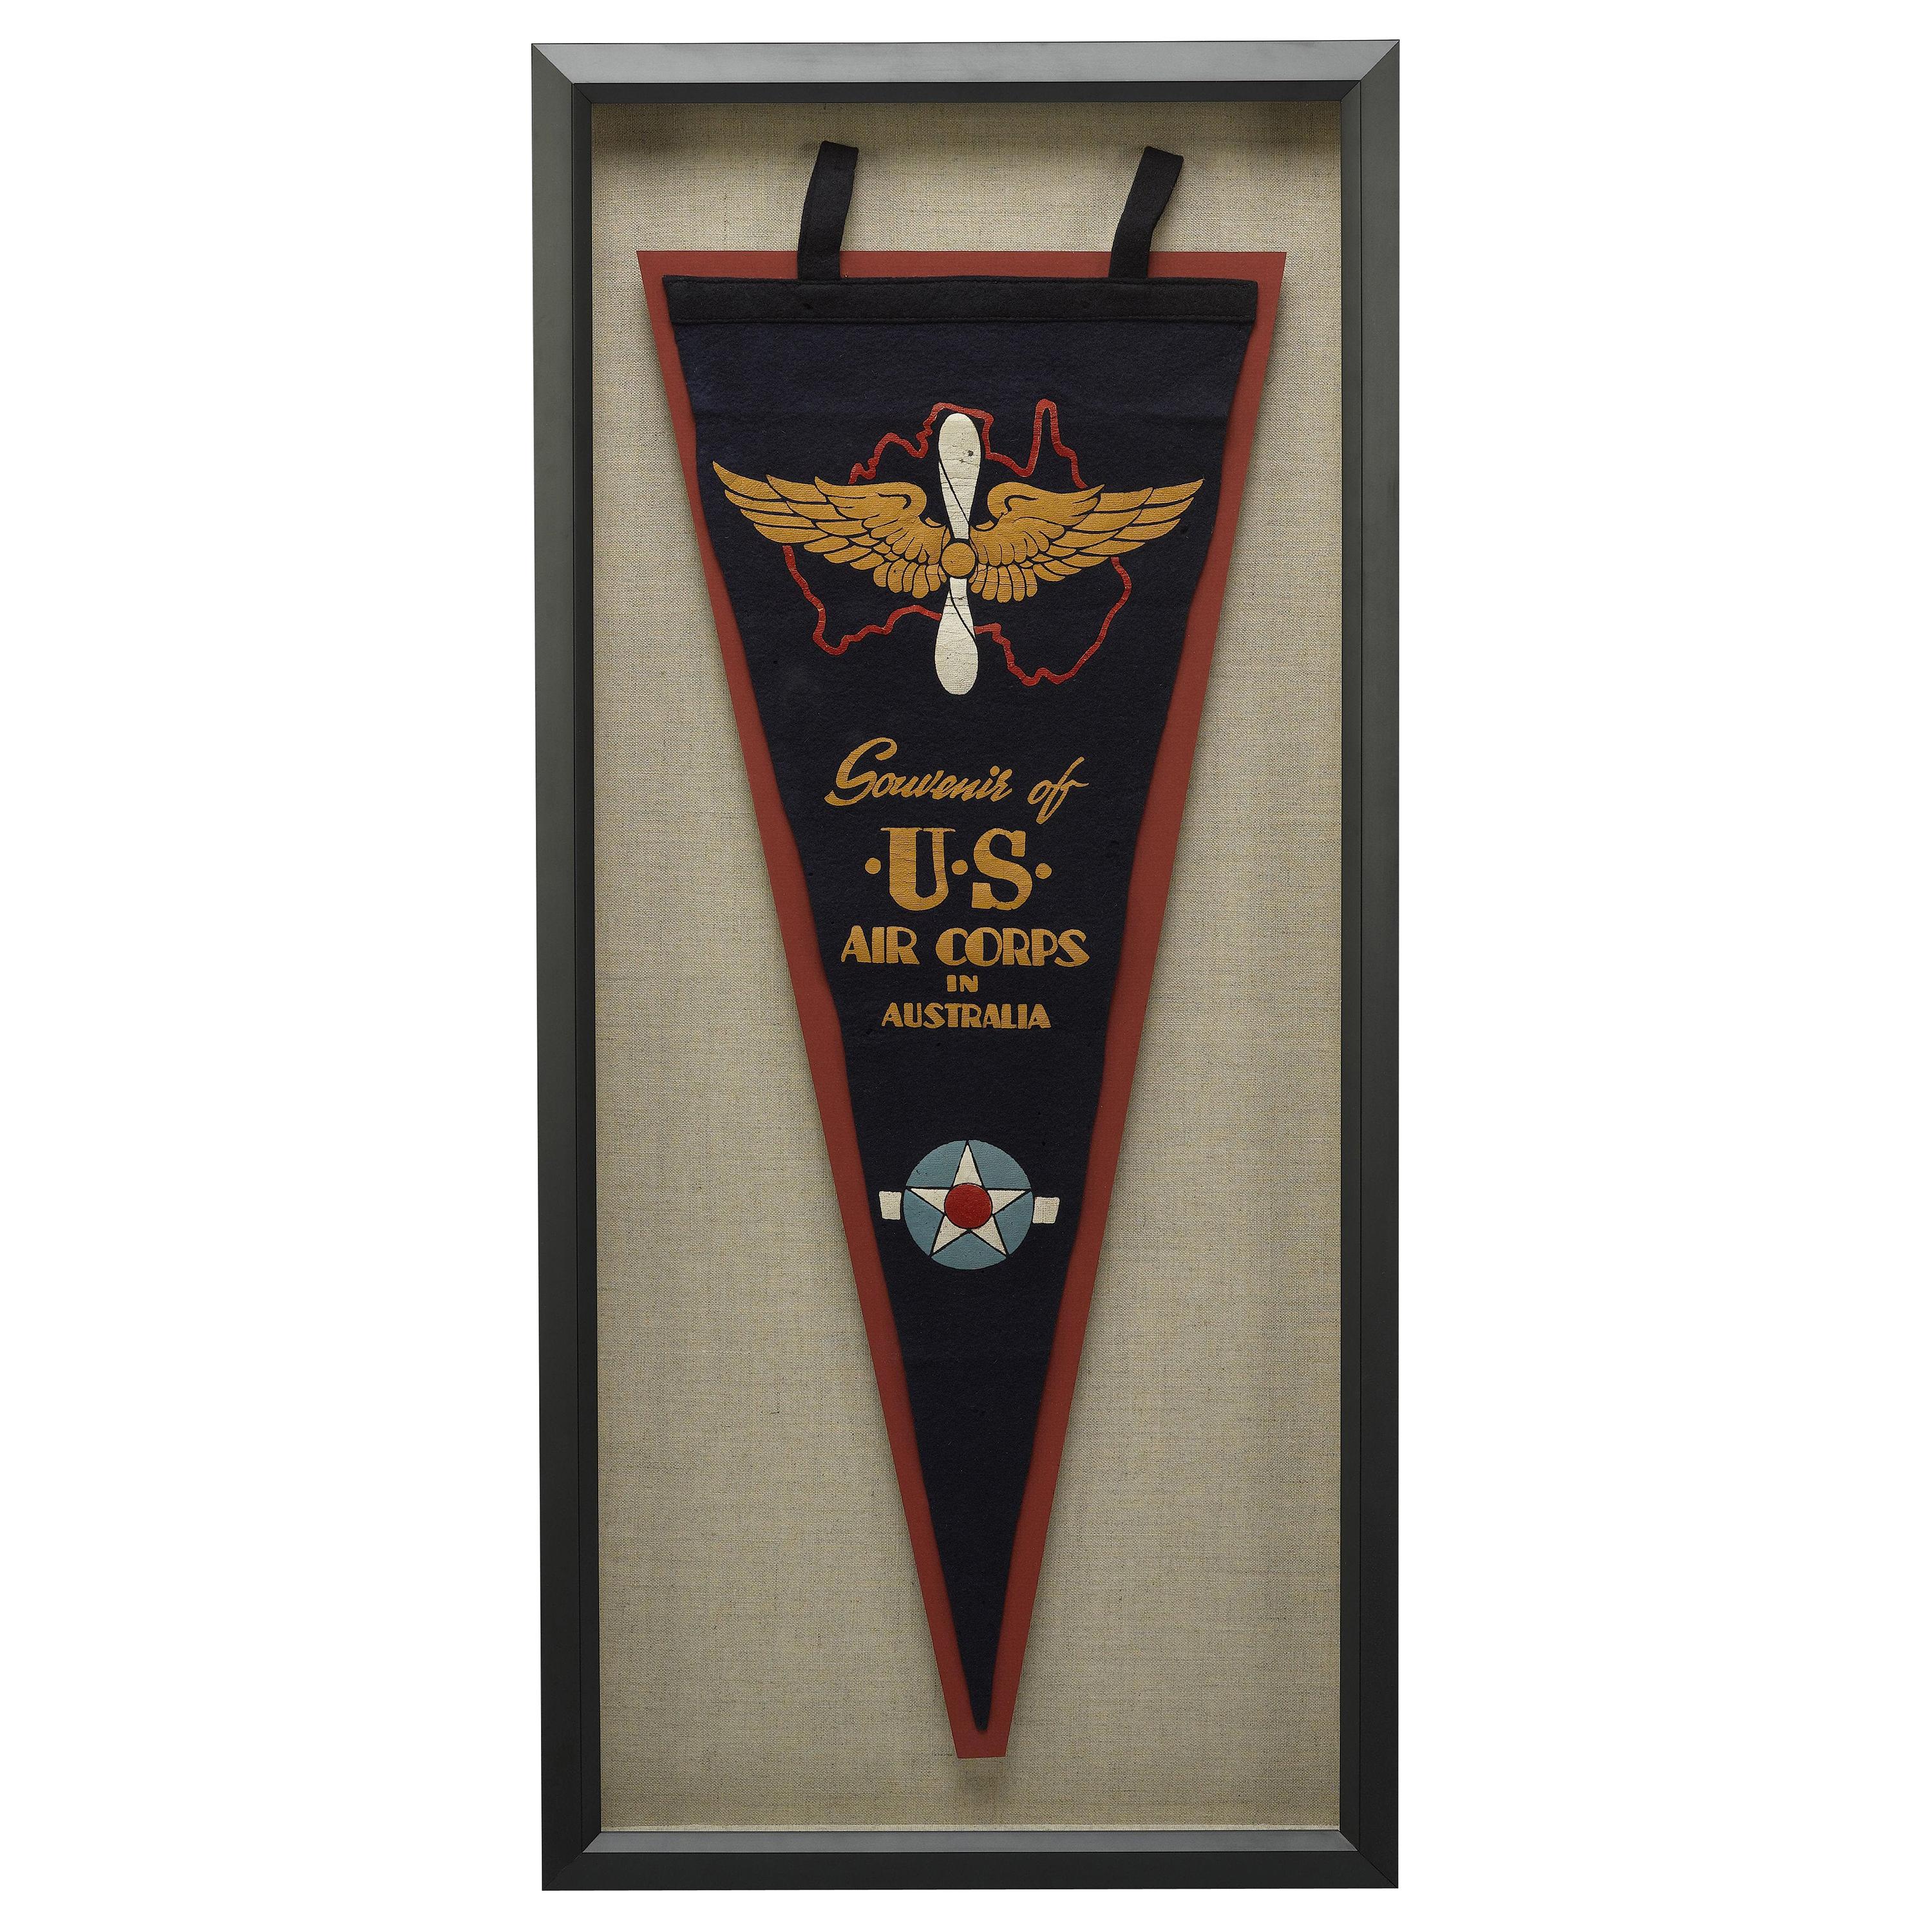 US Air Corps in Australia Vintage Military Pennant, circa WWII